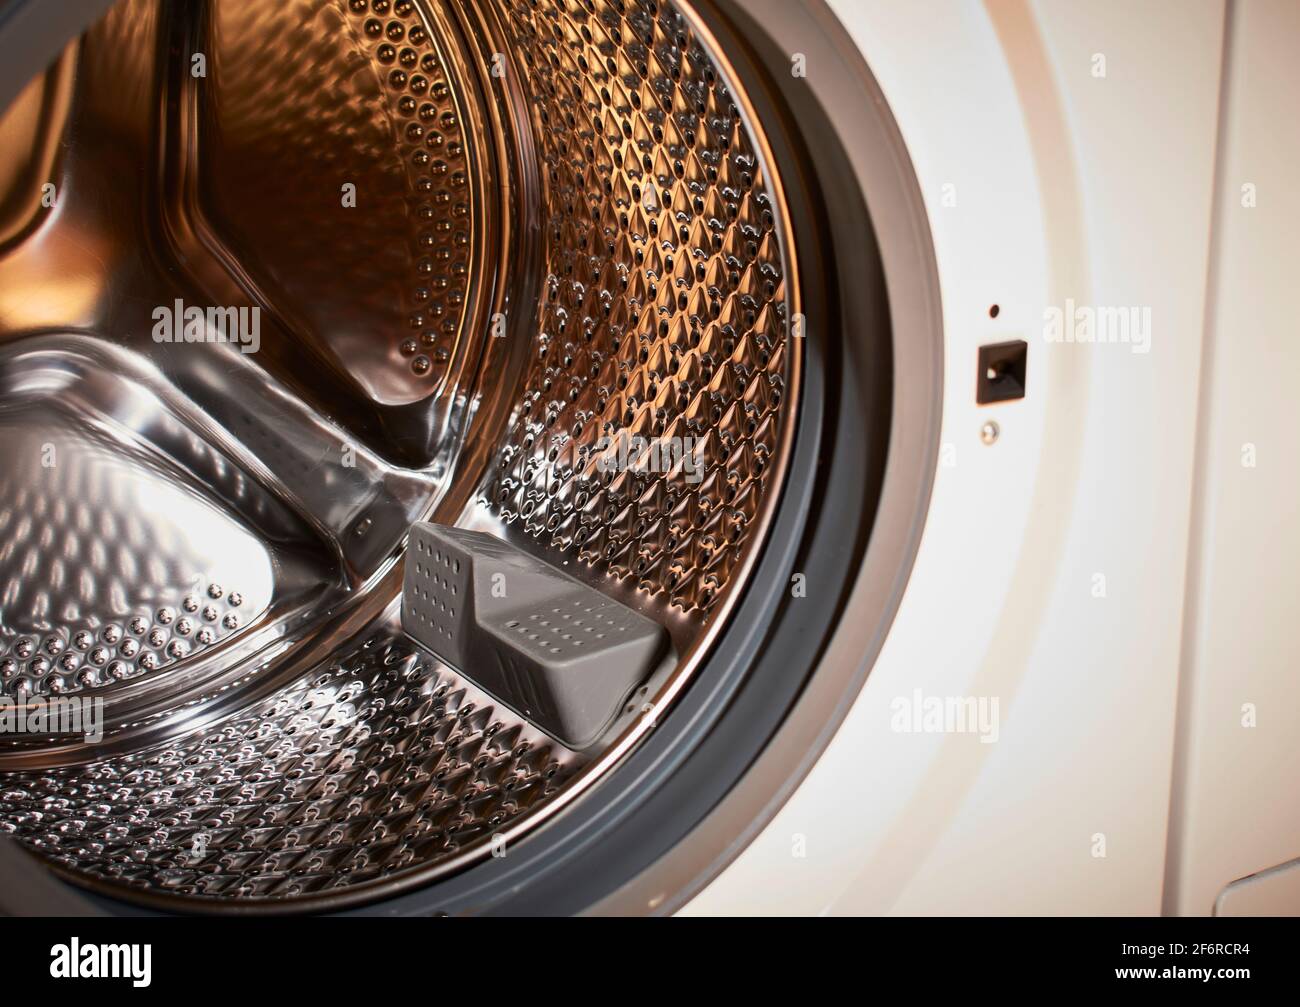 Empty drum of an automatic washing machine in bright colors Stock Photo